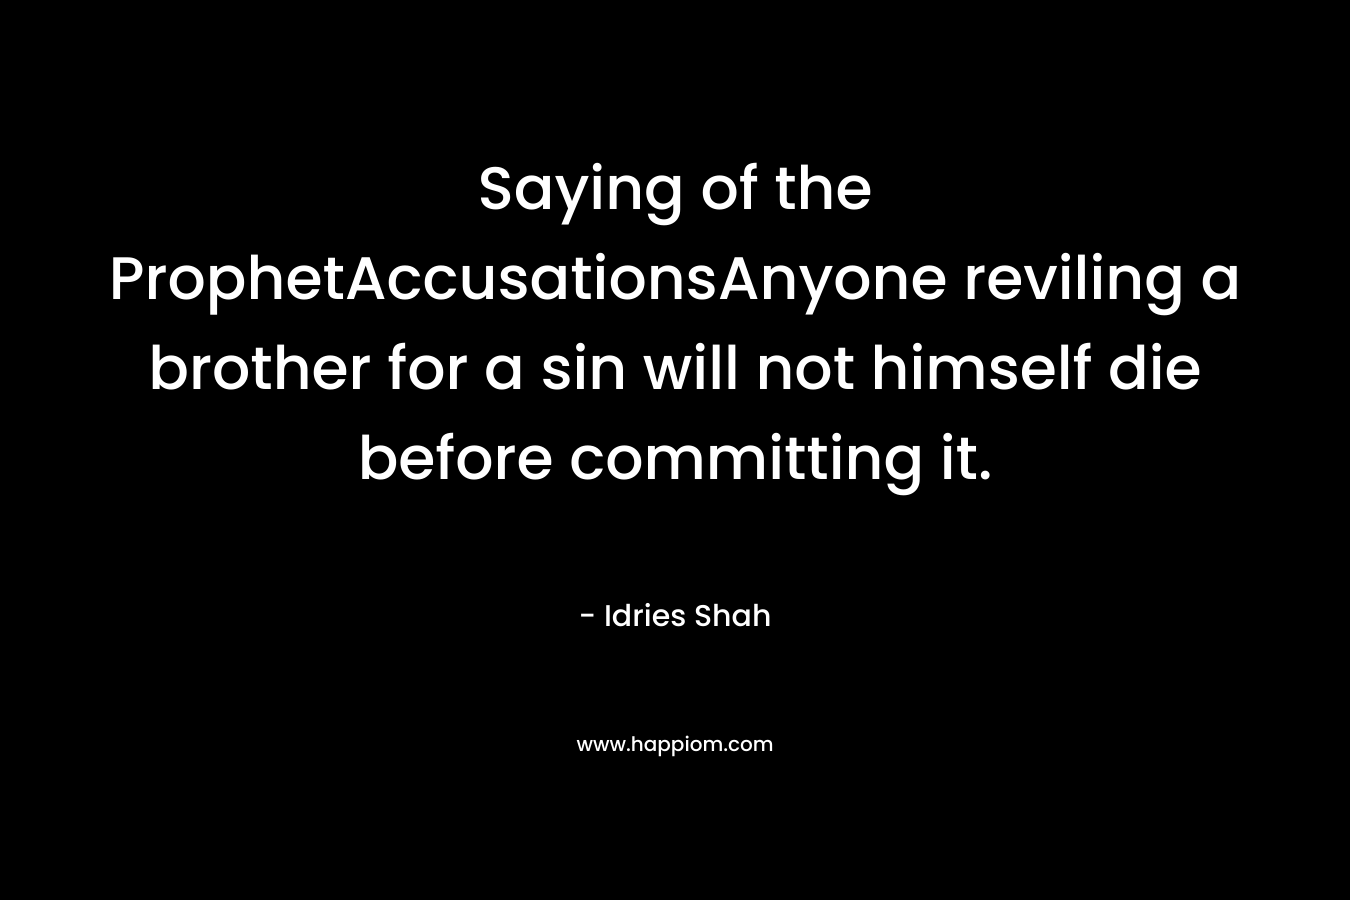 Saying of the ProphetAccusationsAnyone reviling a brother for a sin will not himself die before committing it. – Idries Shah